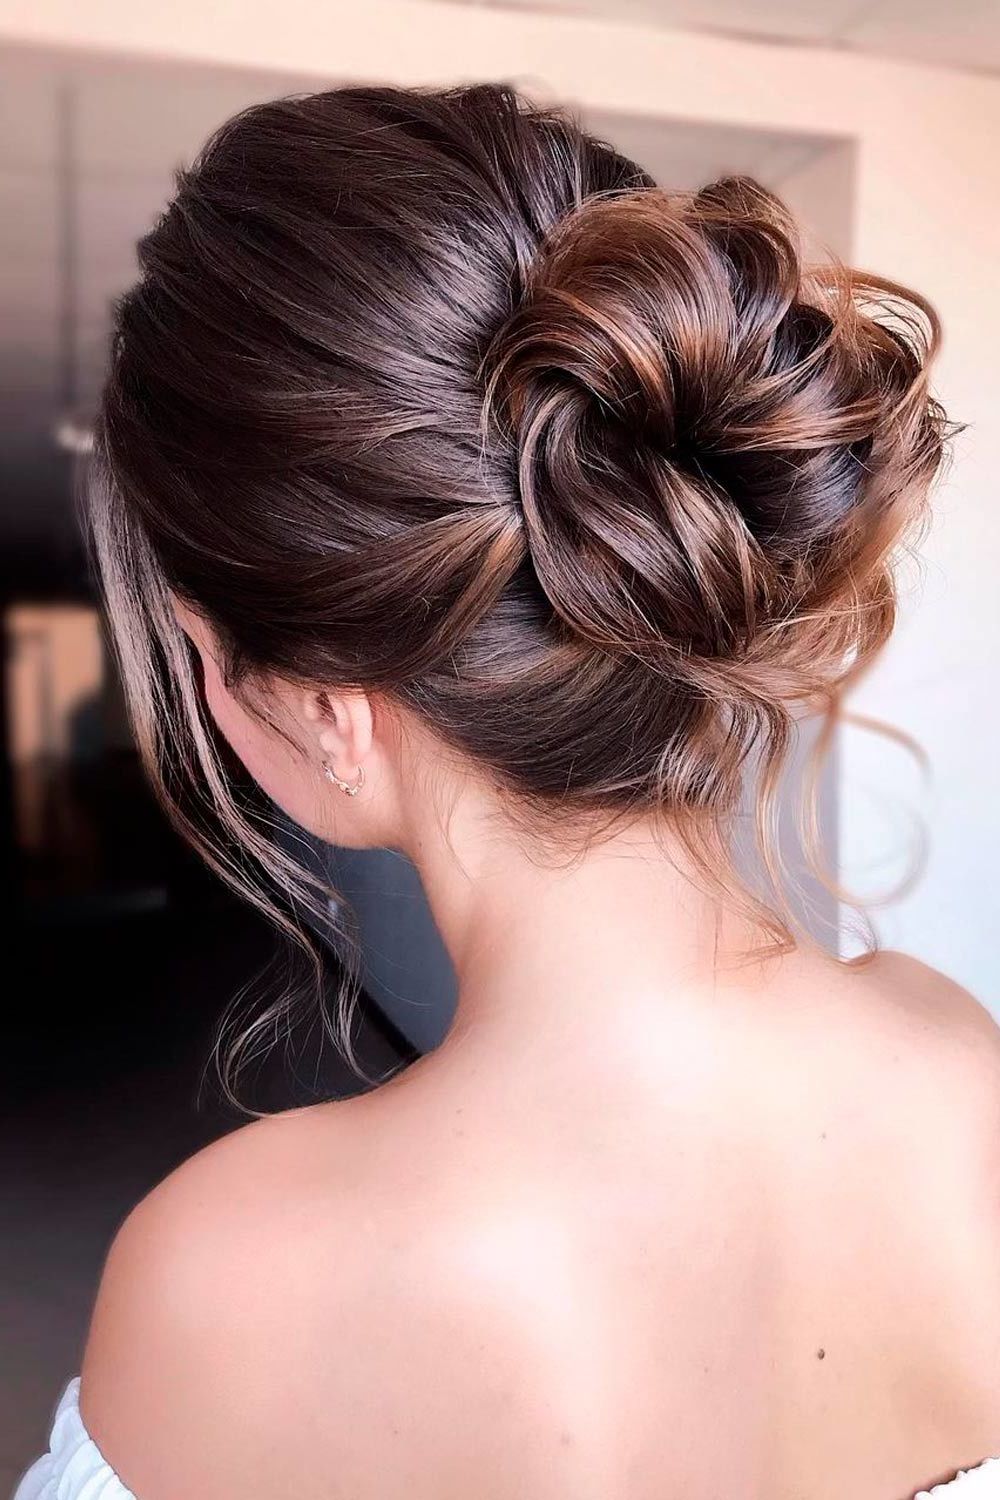 Lovehairstyles (Gallery 19 of 20)